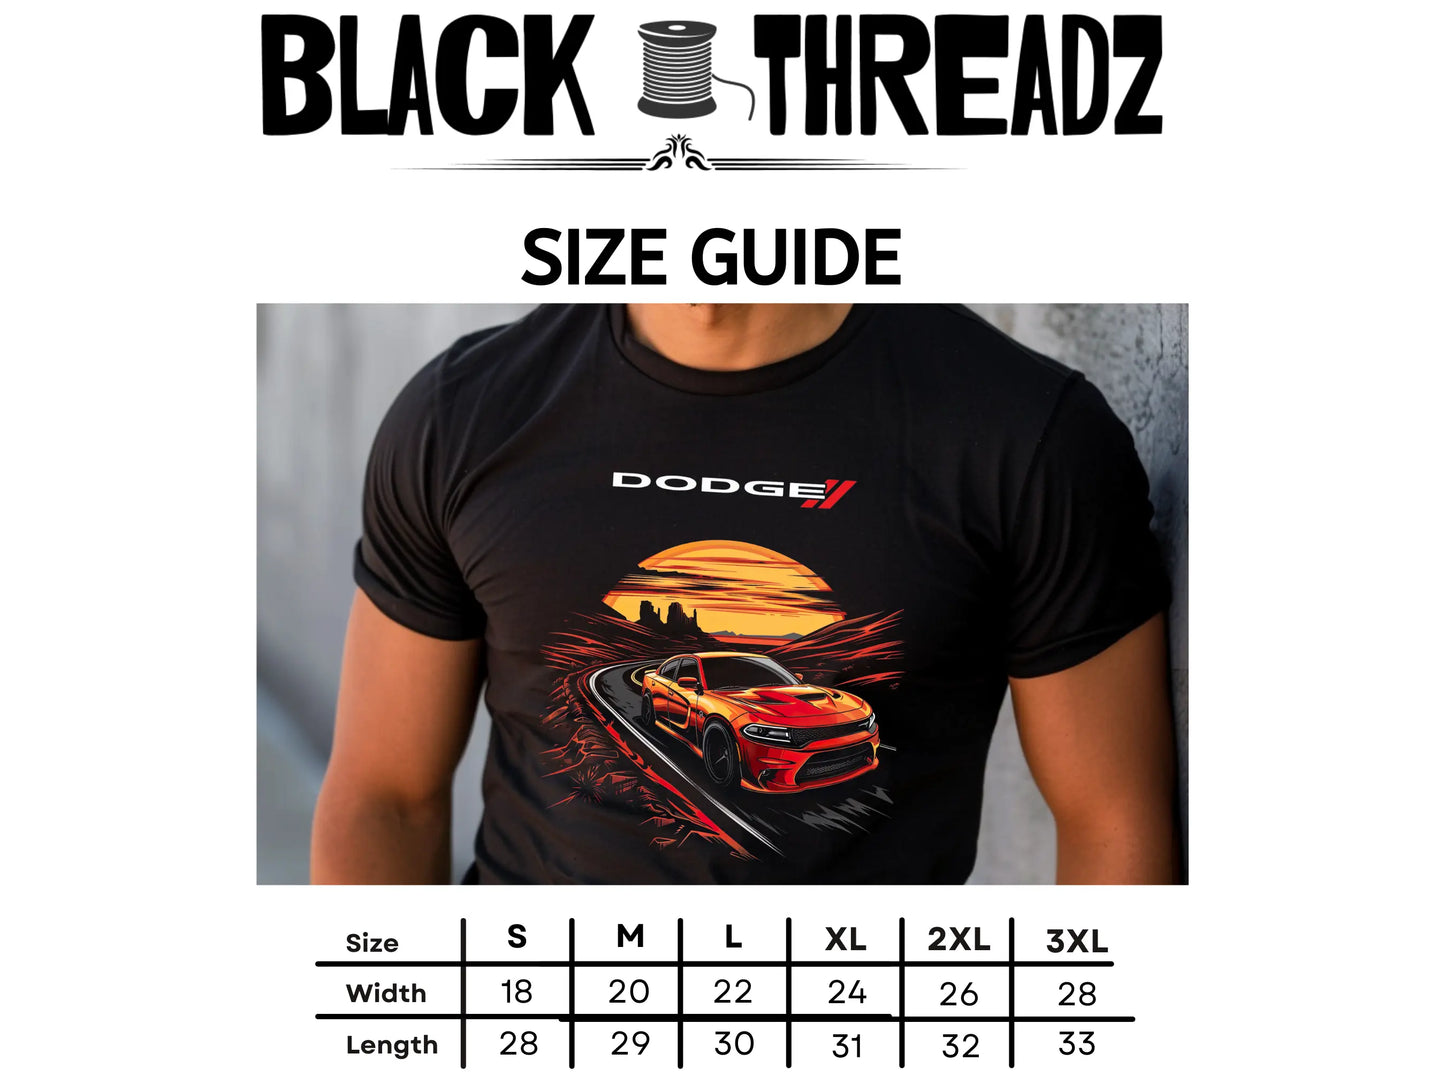 Barbell Power T-Shirt: Unleash Your Strength with this Bold Tee - Black Threadz